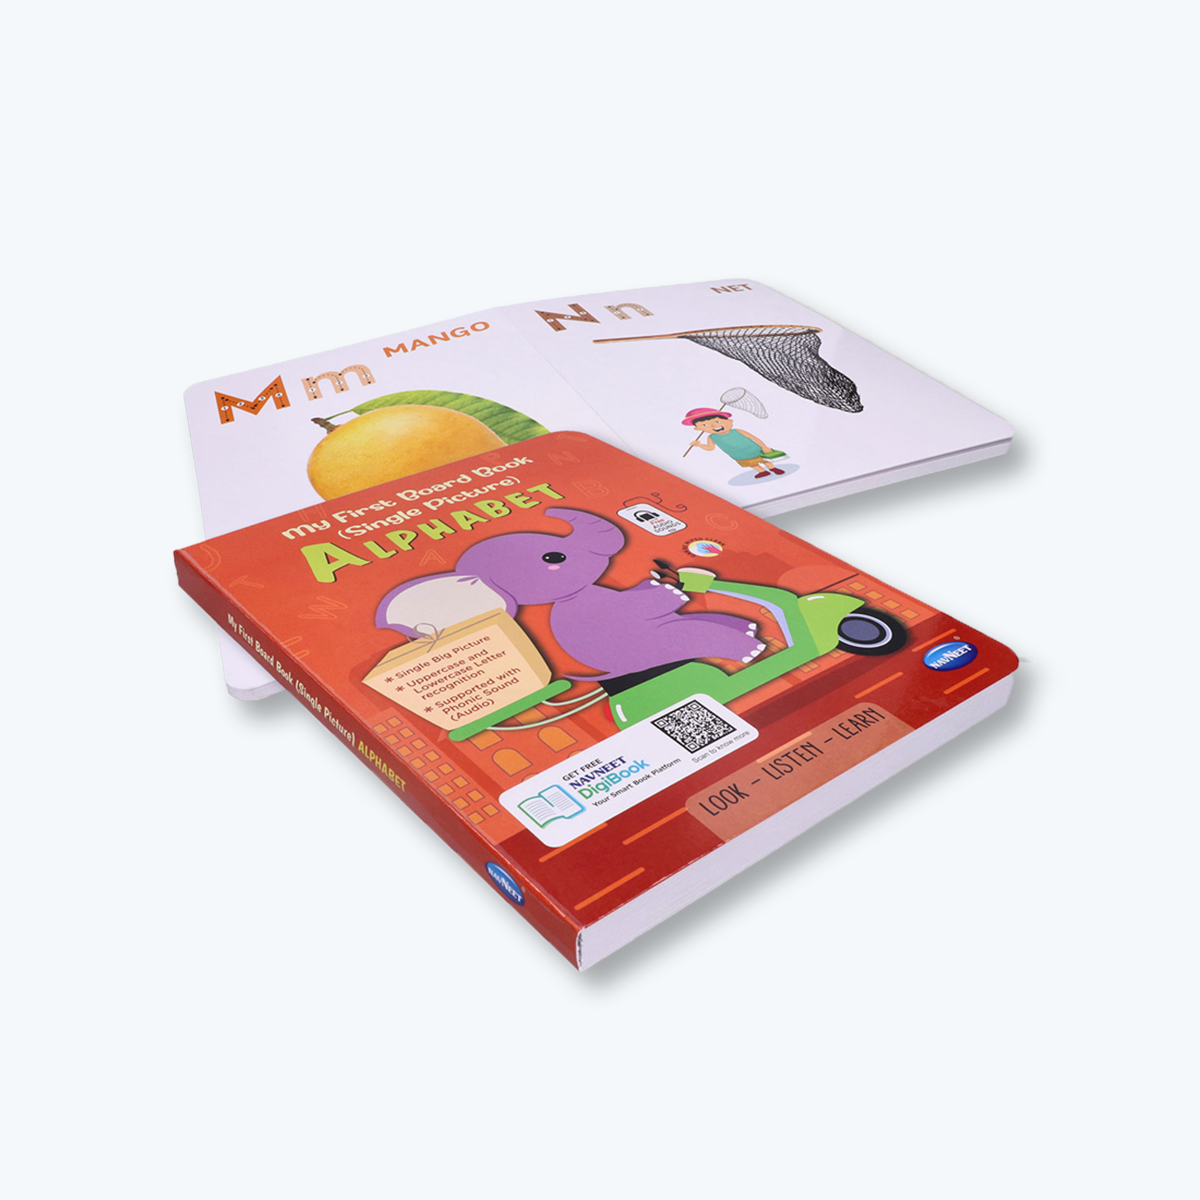 Navneet My First Board Book (Single Picture) Alphabet - Bestselling Picture board books for Babies & Toddlers: Large Picture Board Book with Audio Letter Sounds and ABC song